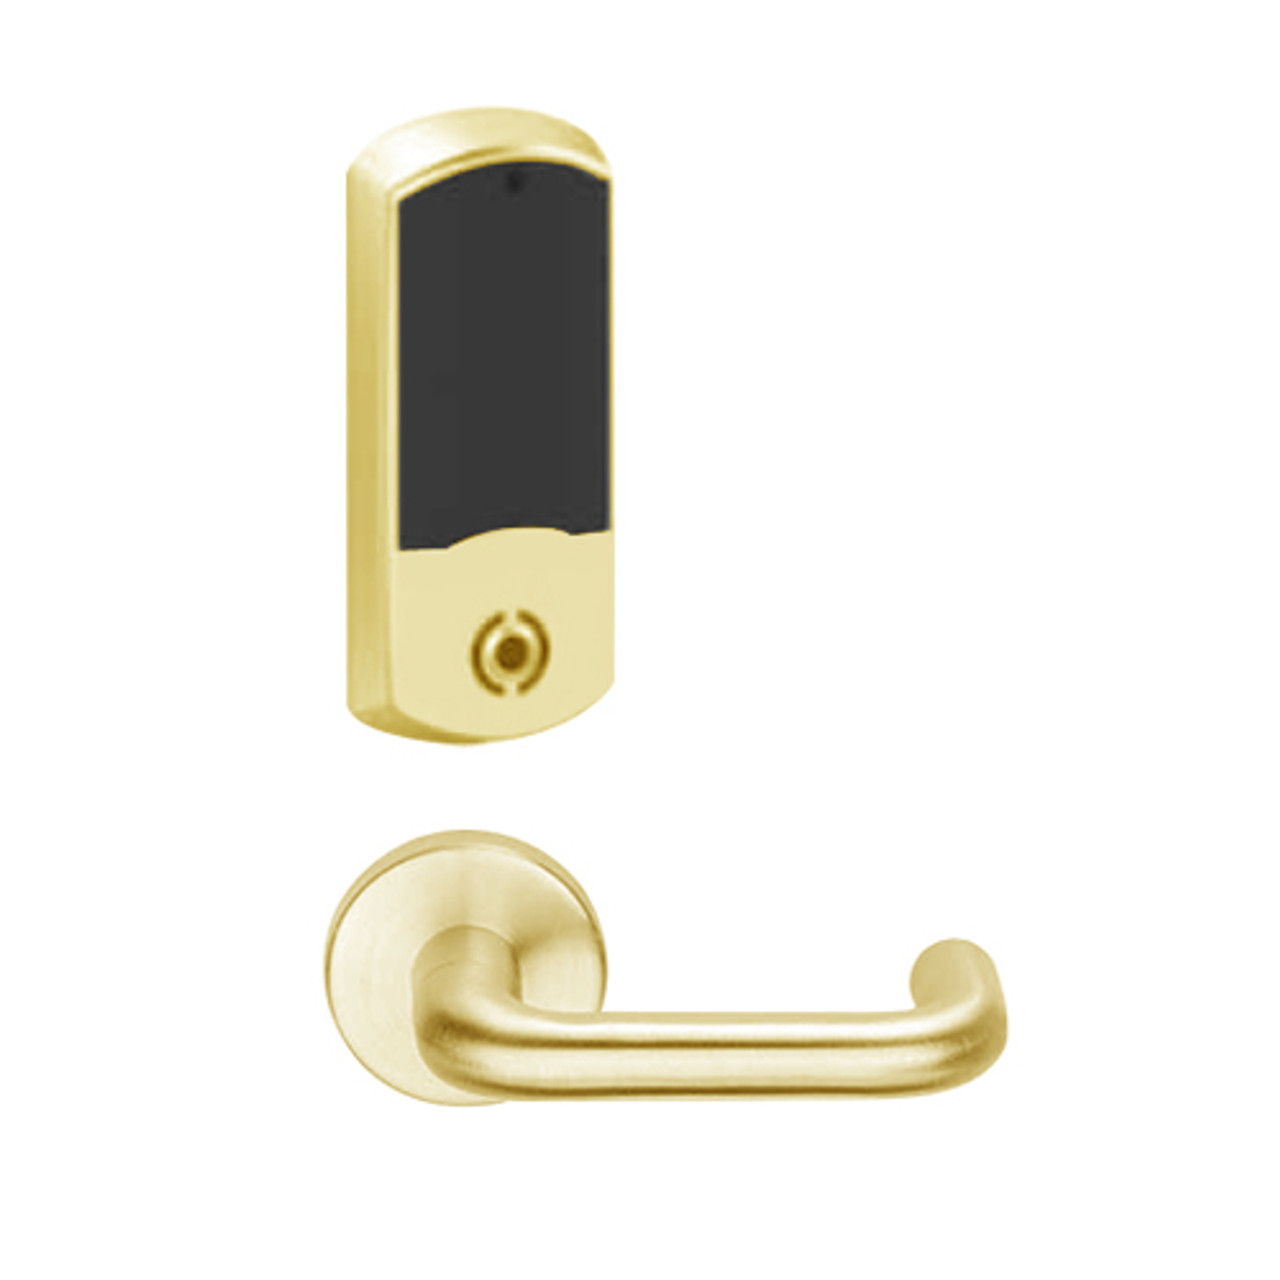 LEMS-GRW-BD-03-605-00B Schlage Storeroom Wireless Greenwich Mortise Lock with LED Indicator and Tubular Lever Prepped for SFIC in Bright Brass